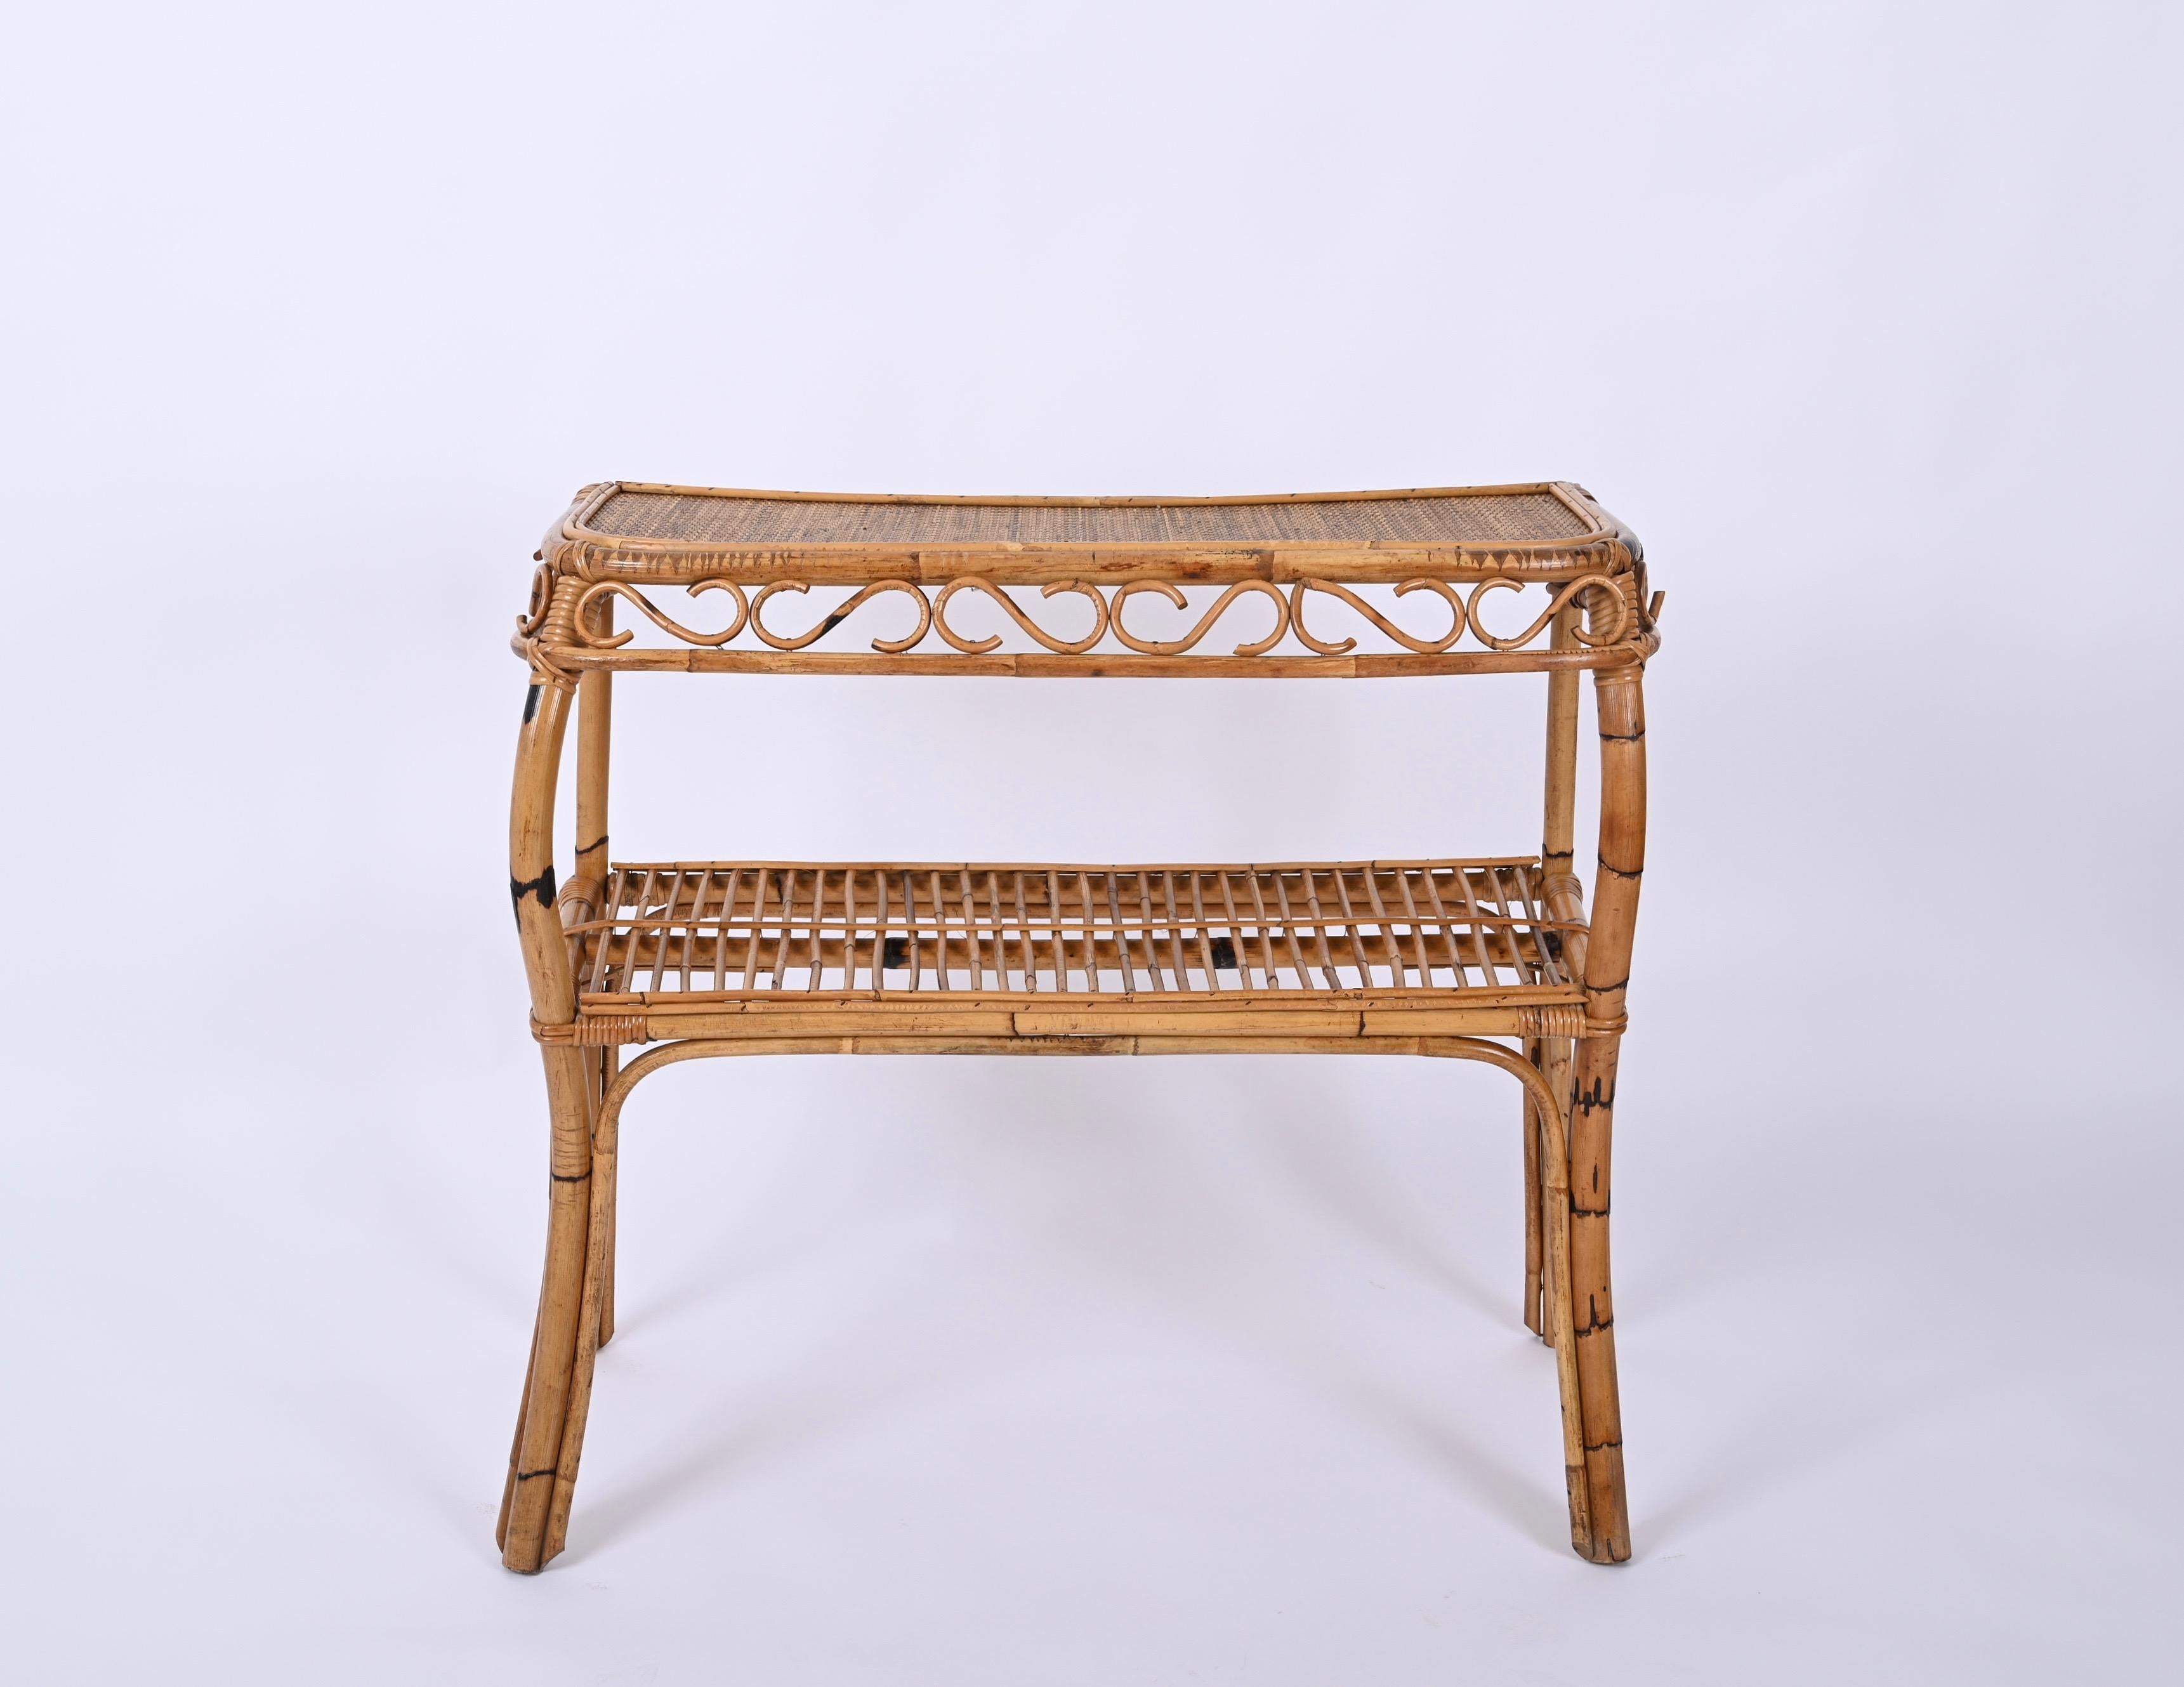 Midcentury Bamboo and Rattan Console Table, Franco Albini, Italy, 1960s For Sale 2